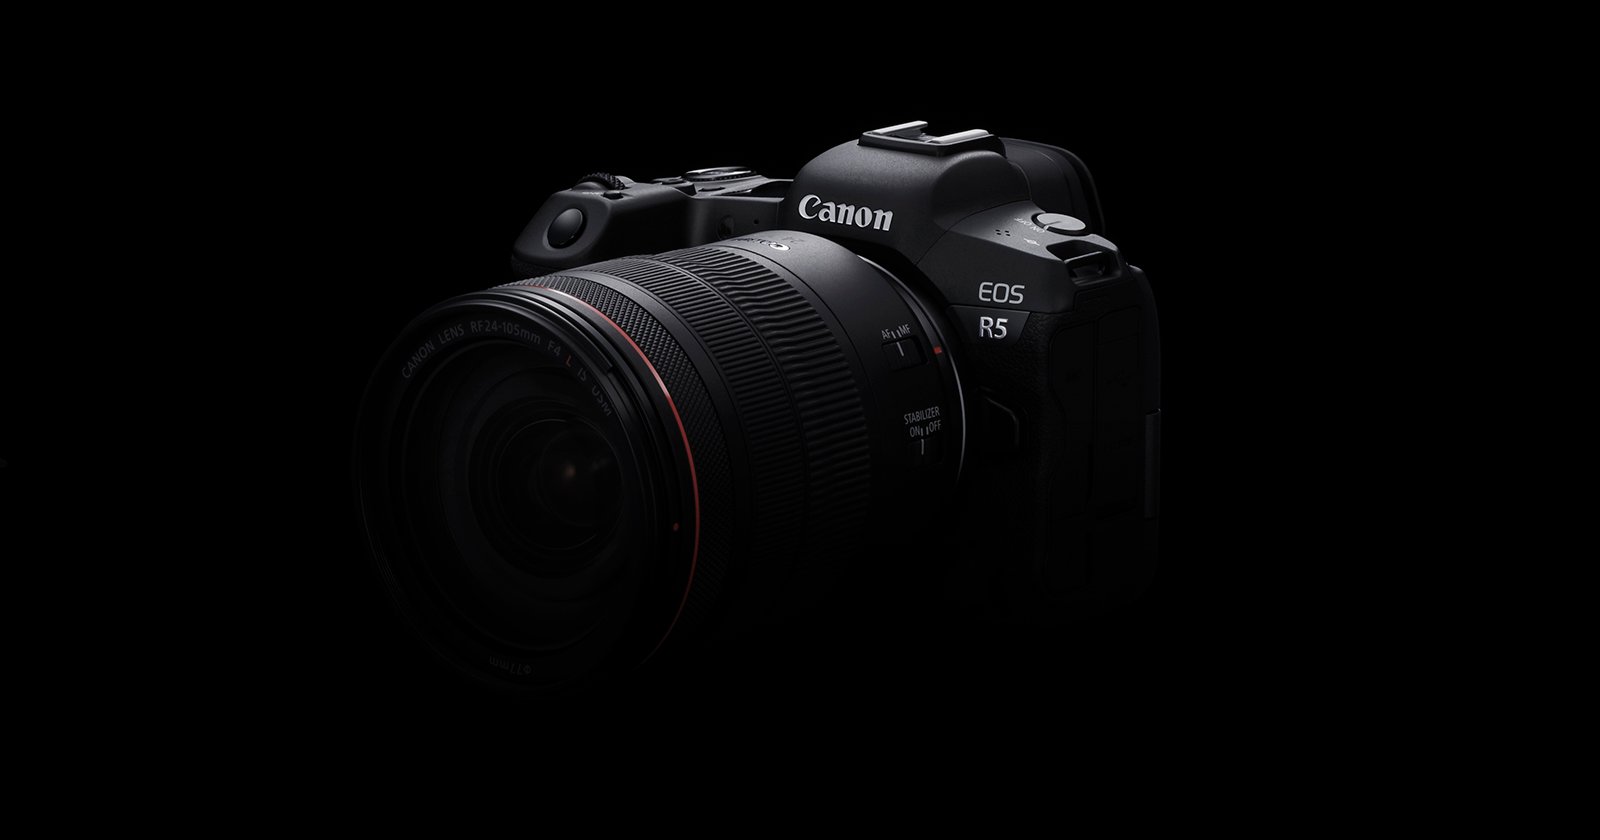 Canon EOS R5 Full Frame Mirrorless Camera - Looking Glass Photo & Camera